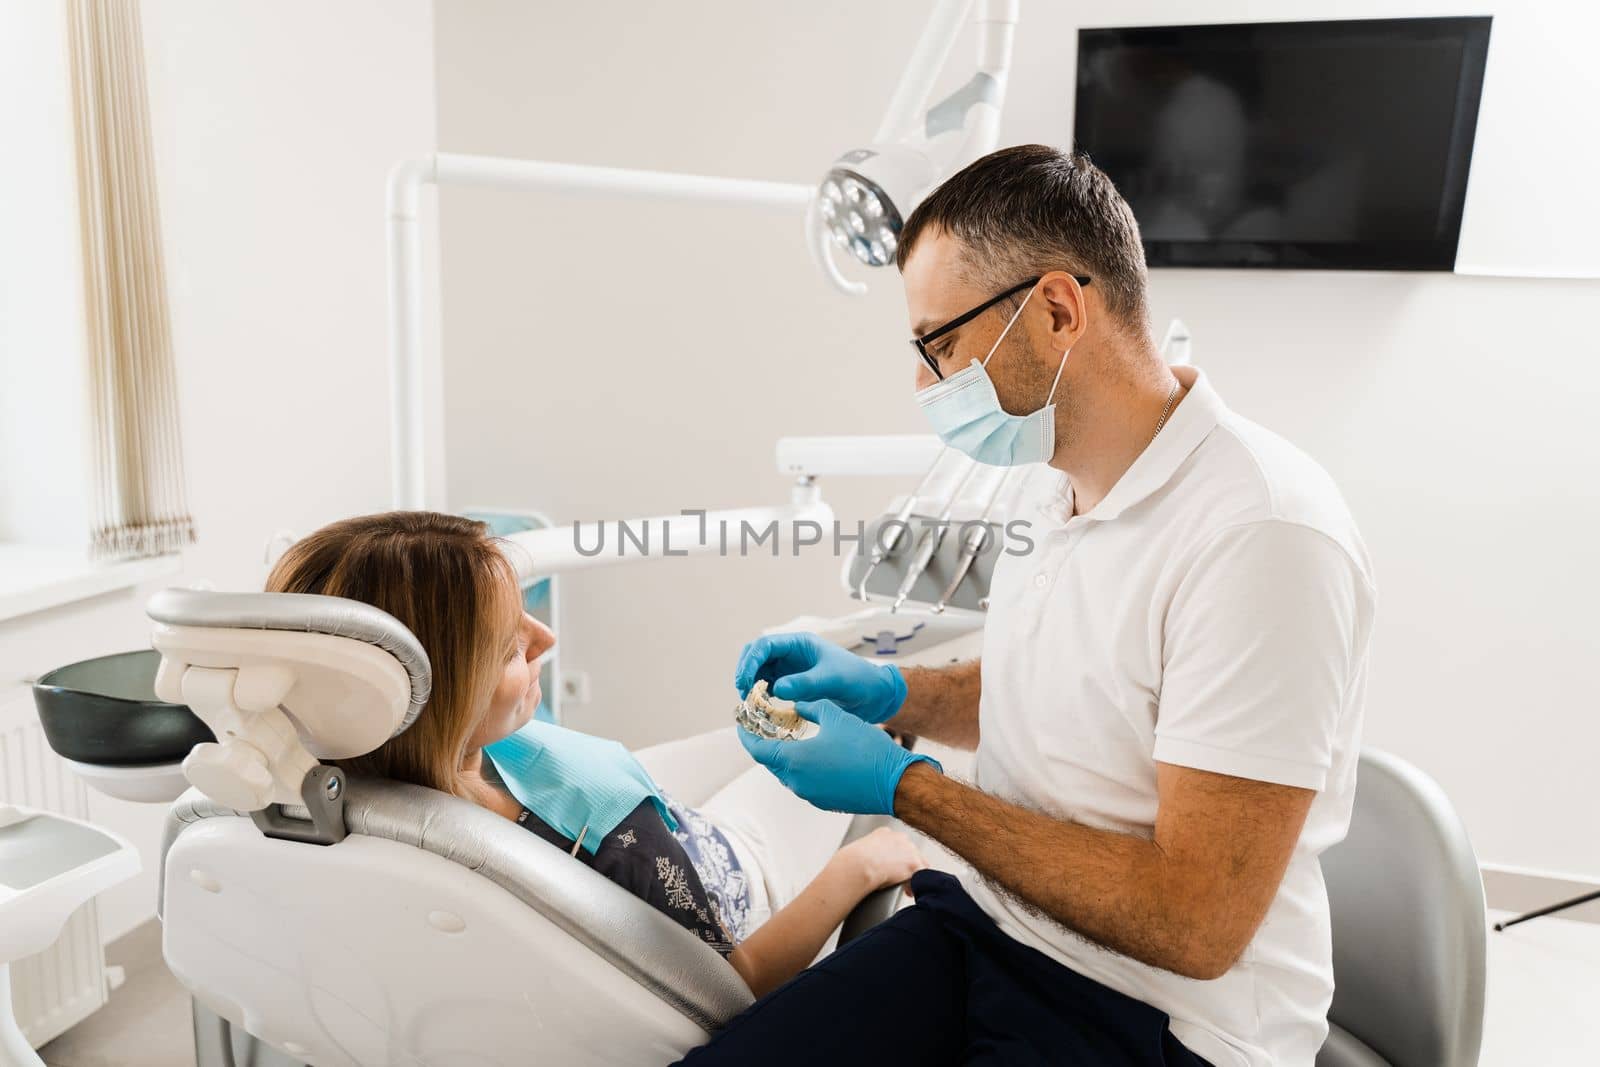 Dental prosthetics consultation with dentist for patient woman in dentistry. Doctor dentist shows artificial plastic jaw with dental implants